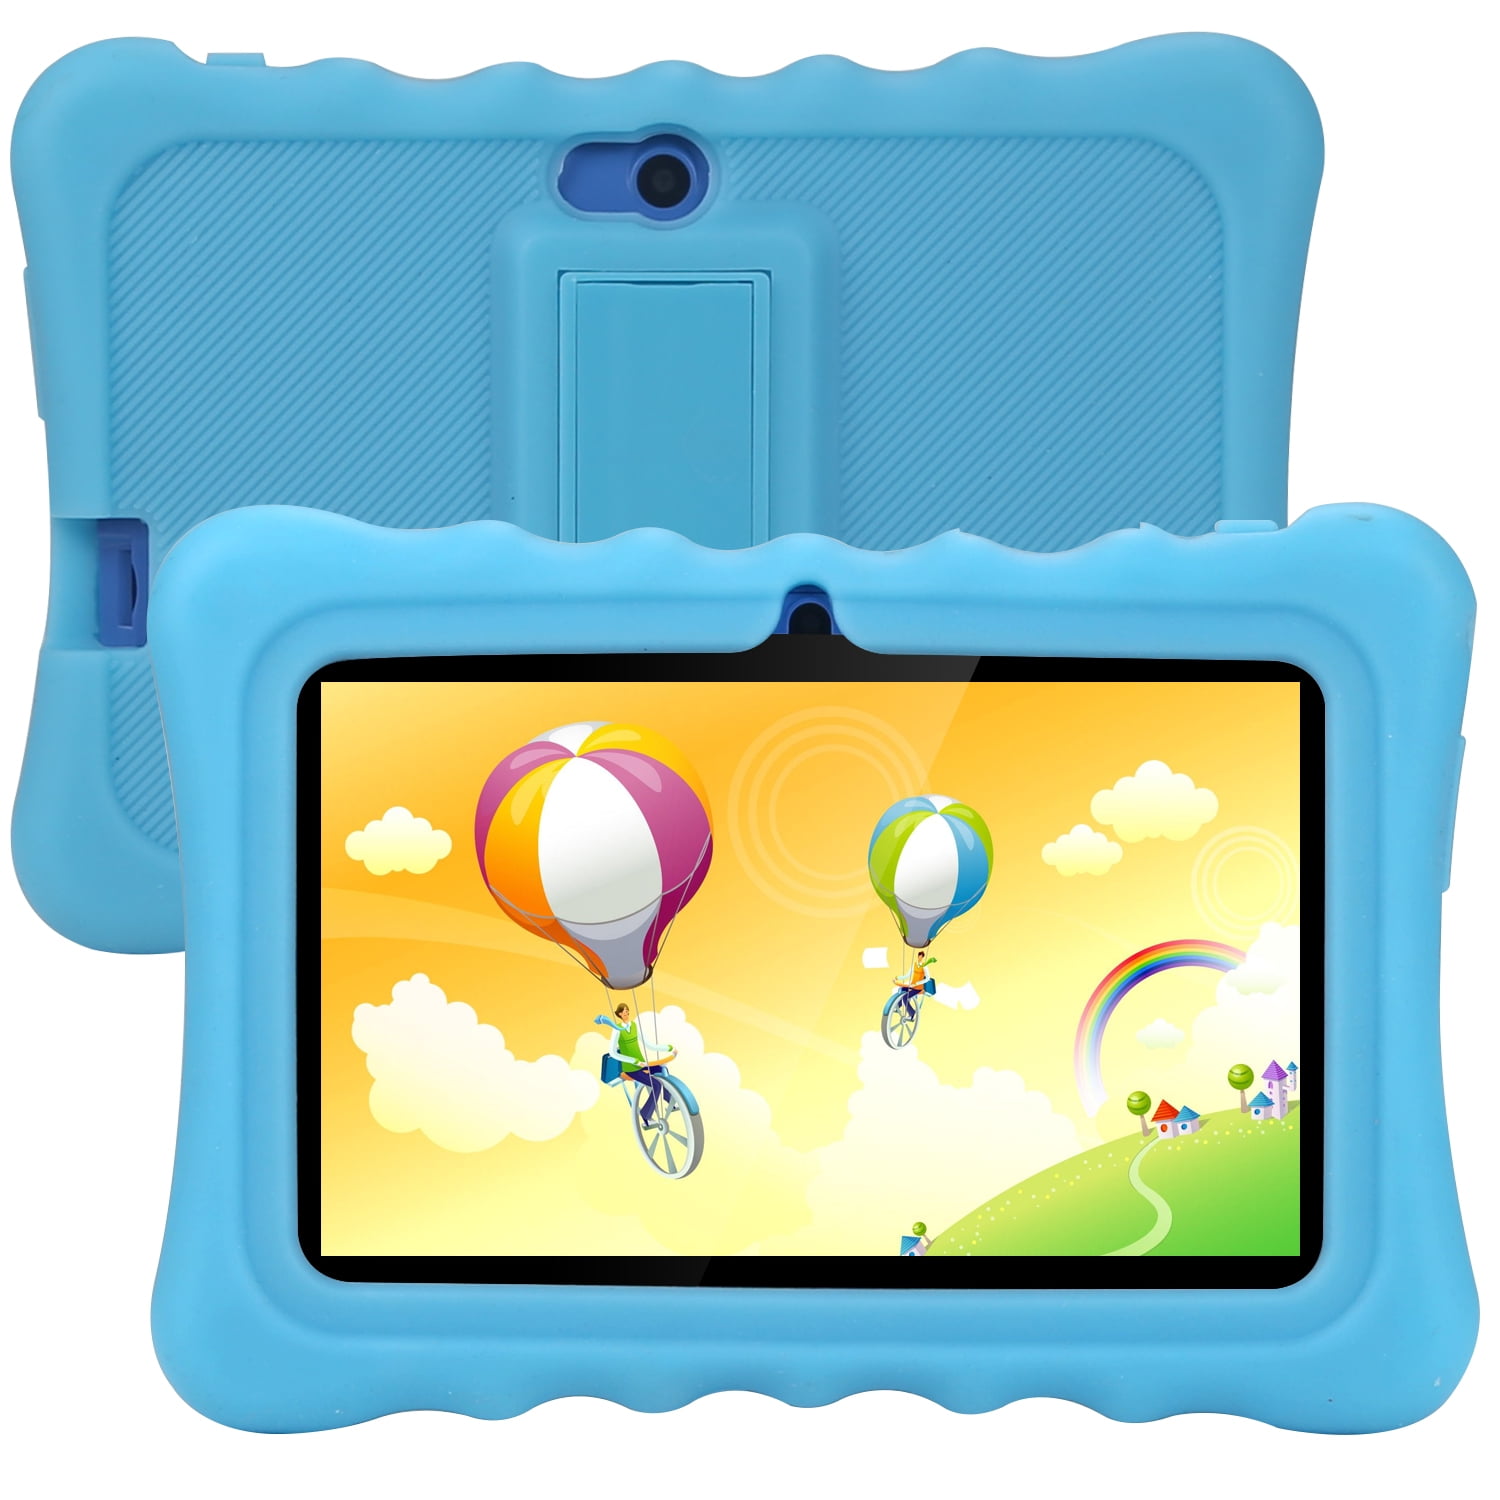 Tagital T7K Plus 7&rdquo; Android Kids Tablet WiFi Camera for Children Infants Toddlers Kids Parental Control with Kickoff Stand Case